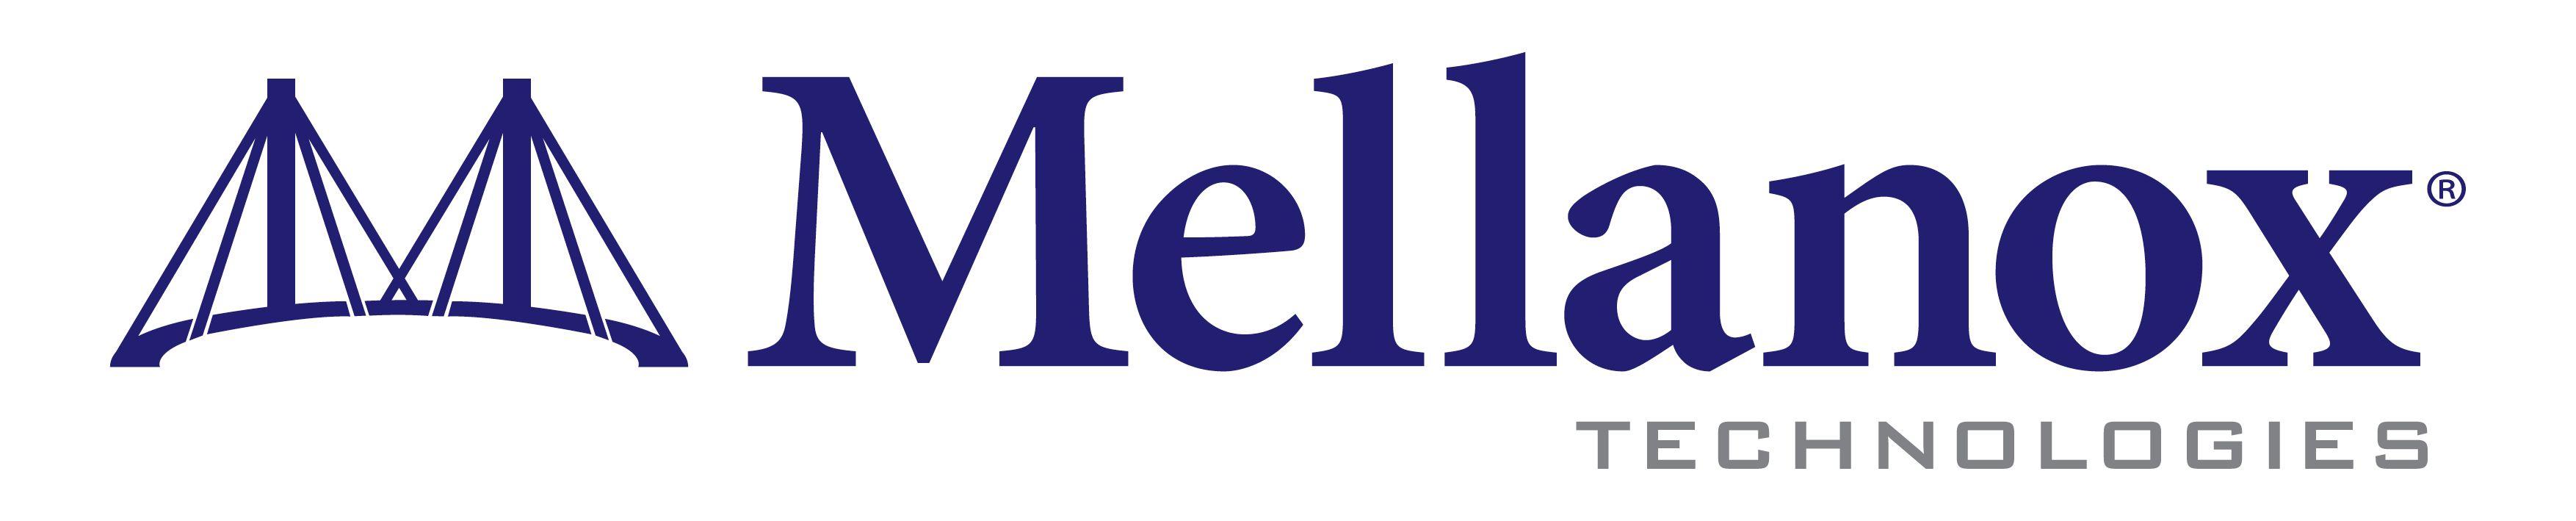 Ethernet Logo - Mellanox Technologies: End-to-End InfiniBand and Ethernet ...